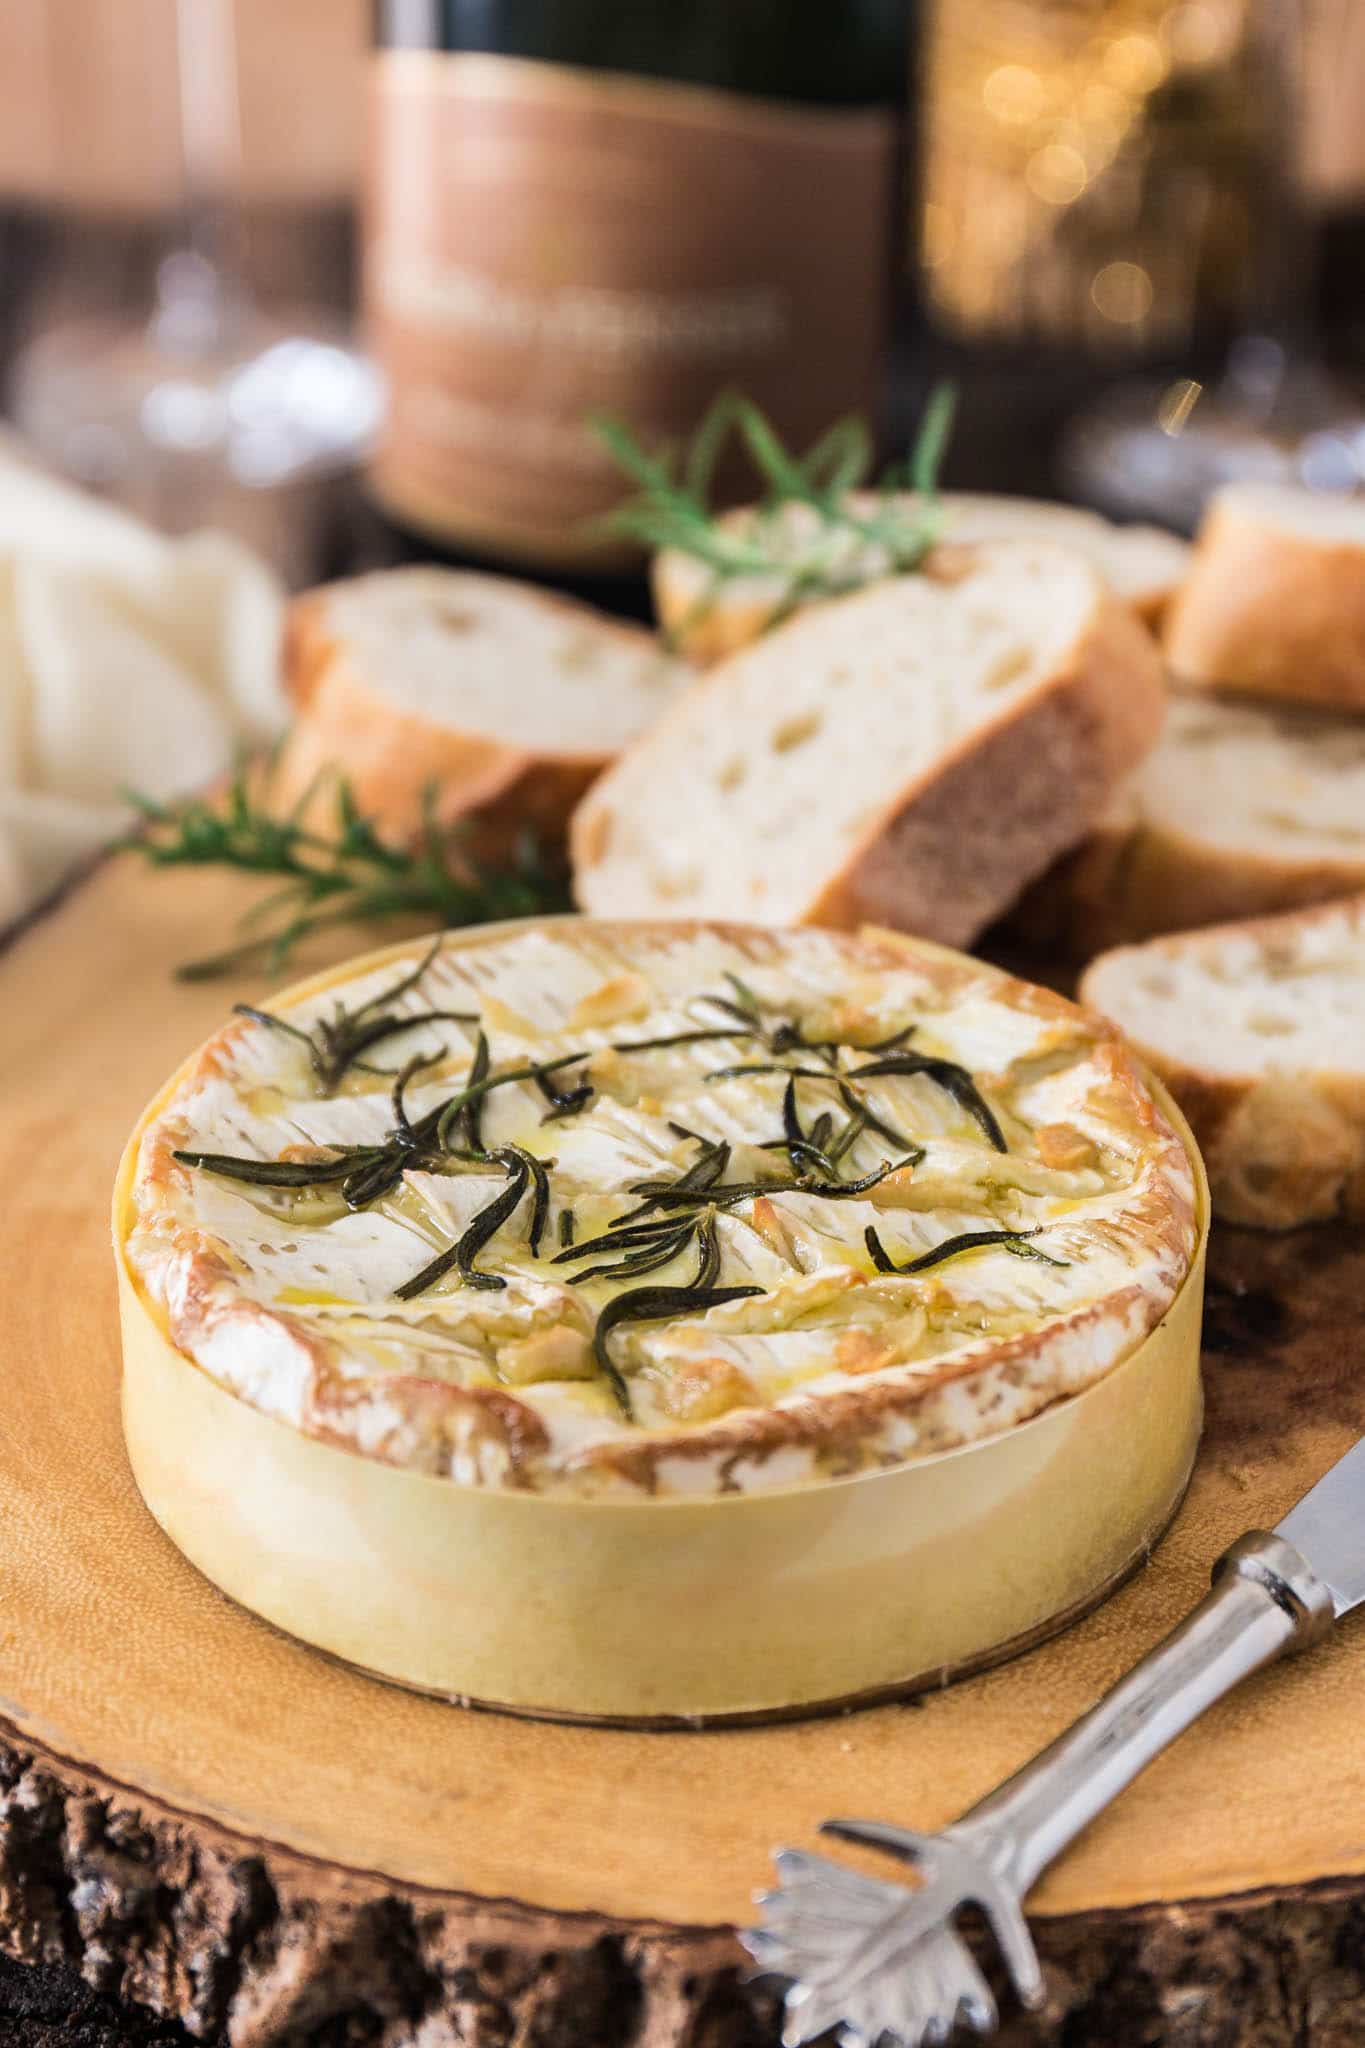 Baked Camembert with Garlic and Rosemary | www.oliviascuisine.com | A gooey and fragrant Baked Camembert is always a must at my dinner parties. This version with garlic and rosemary is one of my favorites and pairs greatly with a glass of bubbly!